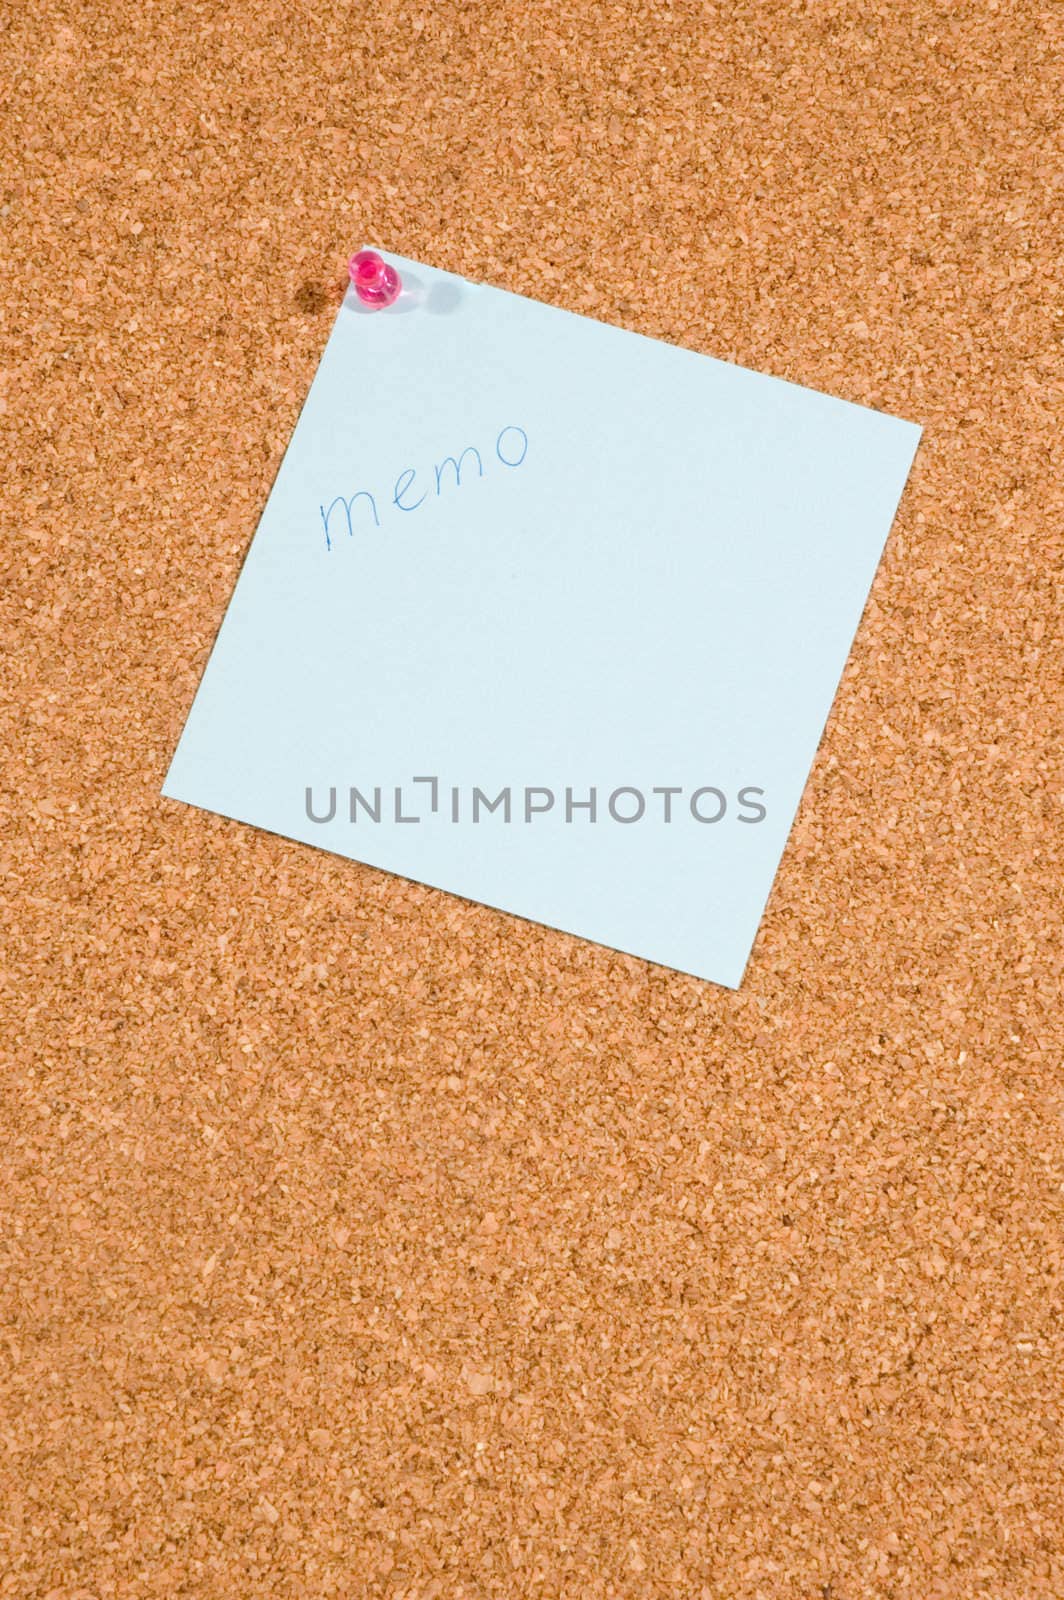 memo board with message: memo by ladyminnie